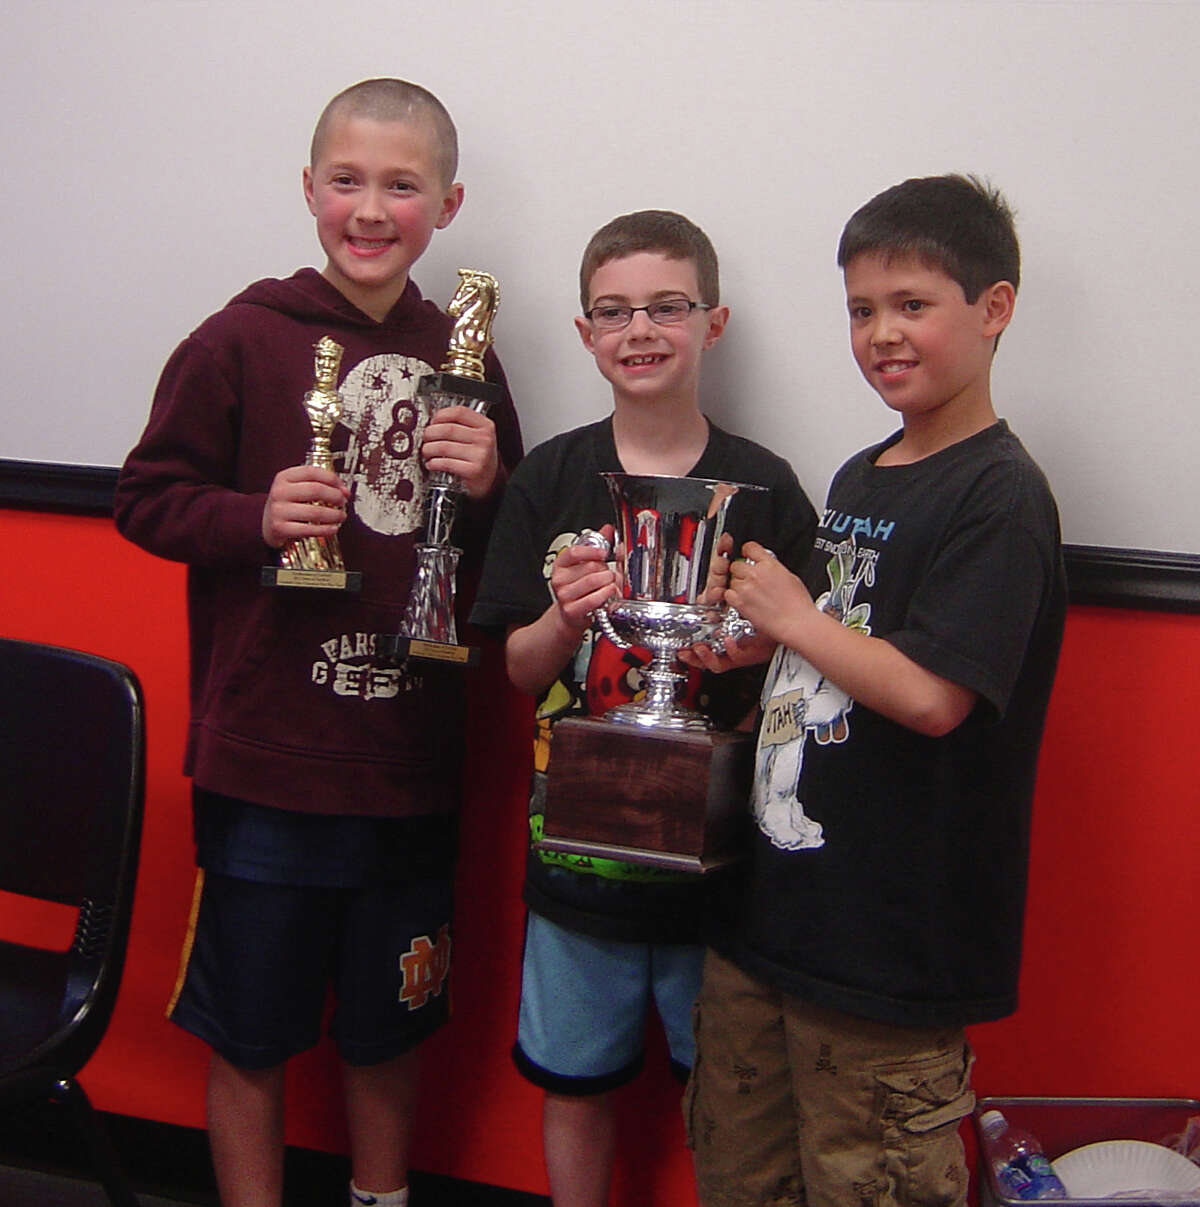 The team from Burr Elementary School, comprised of, left to right, Cole Markham, Zachary Amendola and Merritt Hayes, took first place in the recent Town of Fairfield Scholastic Chess Championships. Markham was also awarded the tournament's "Top Chess Player."